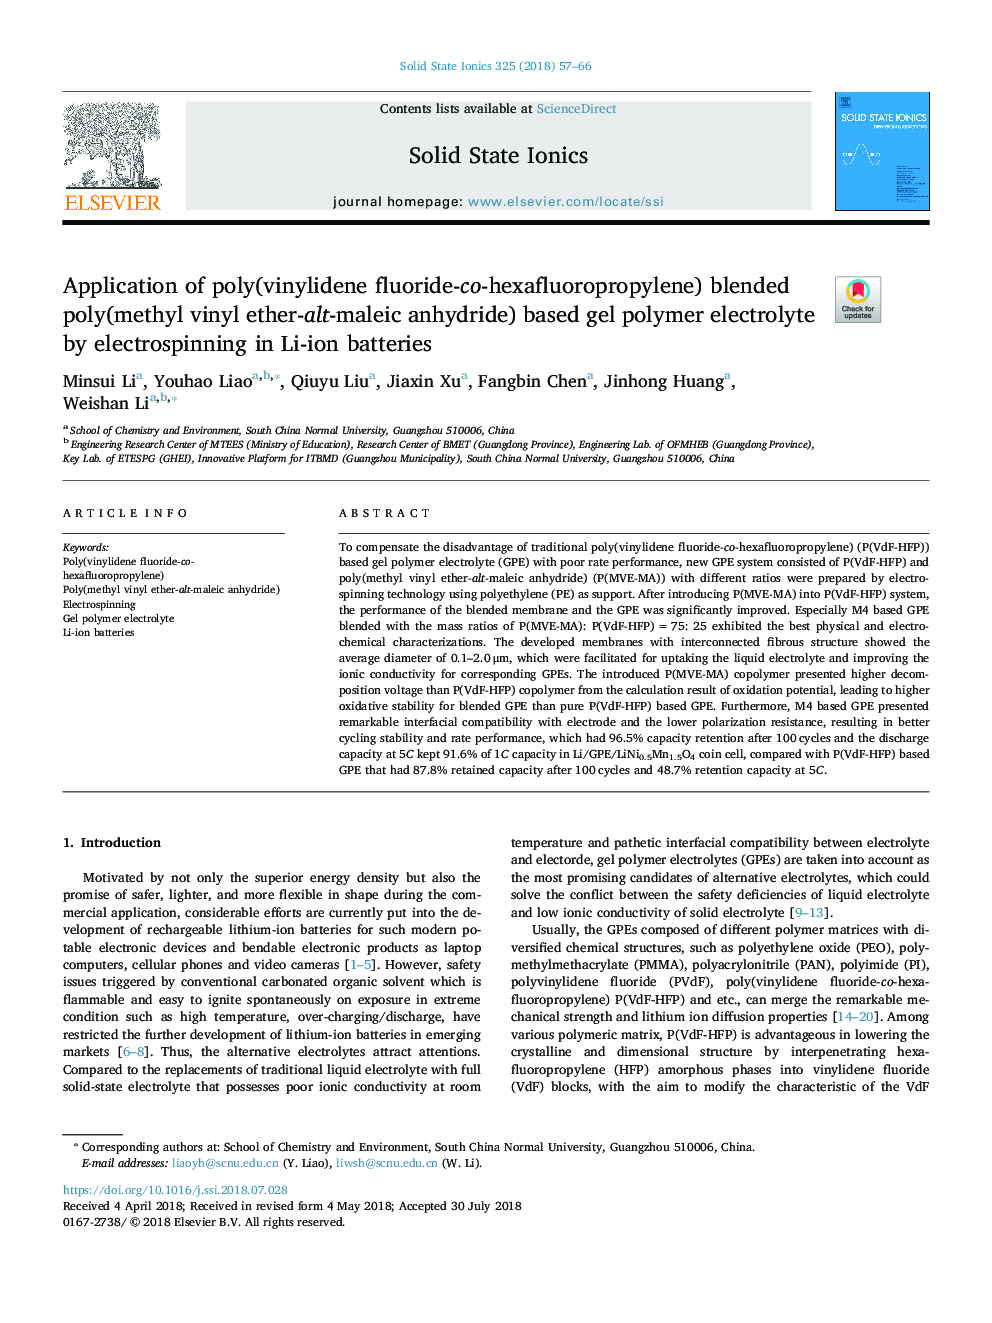 Application of poly(vinylidene fluoride-co-hexafluoropropylene) blended poly(methyl vinyl ether-alt-maleic anhydride) based gel polymer electrolyte by electrospinning in Li-ion batteries